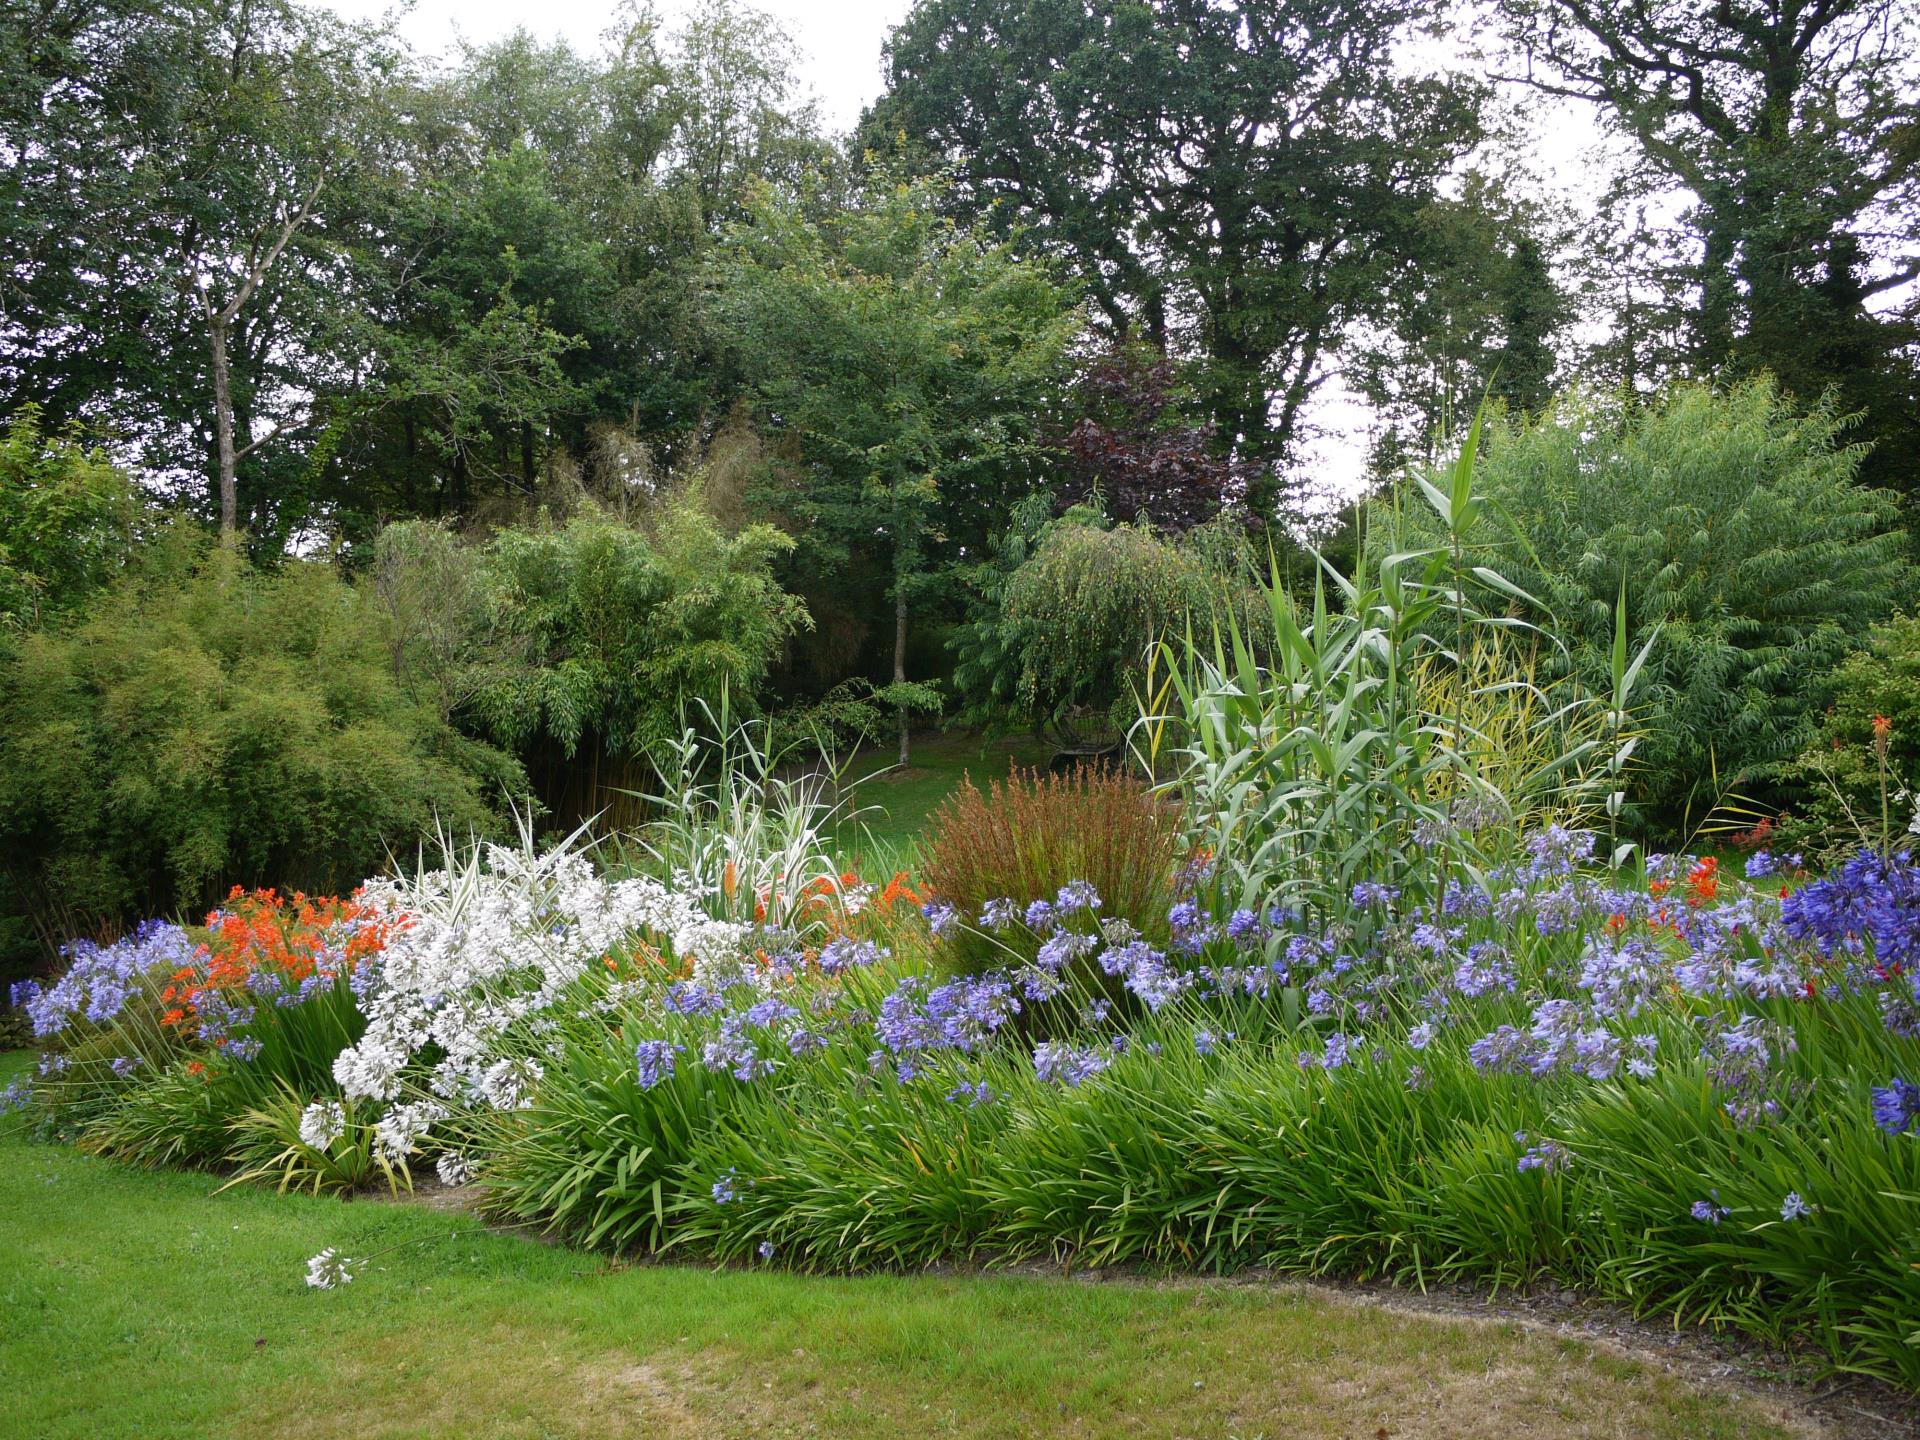 Agapanthus bed with Crocosmia - August